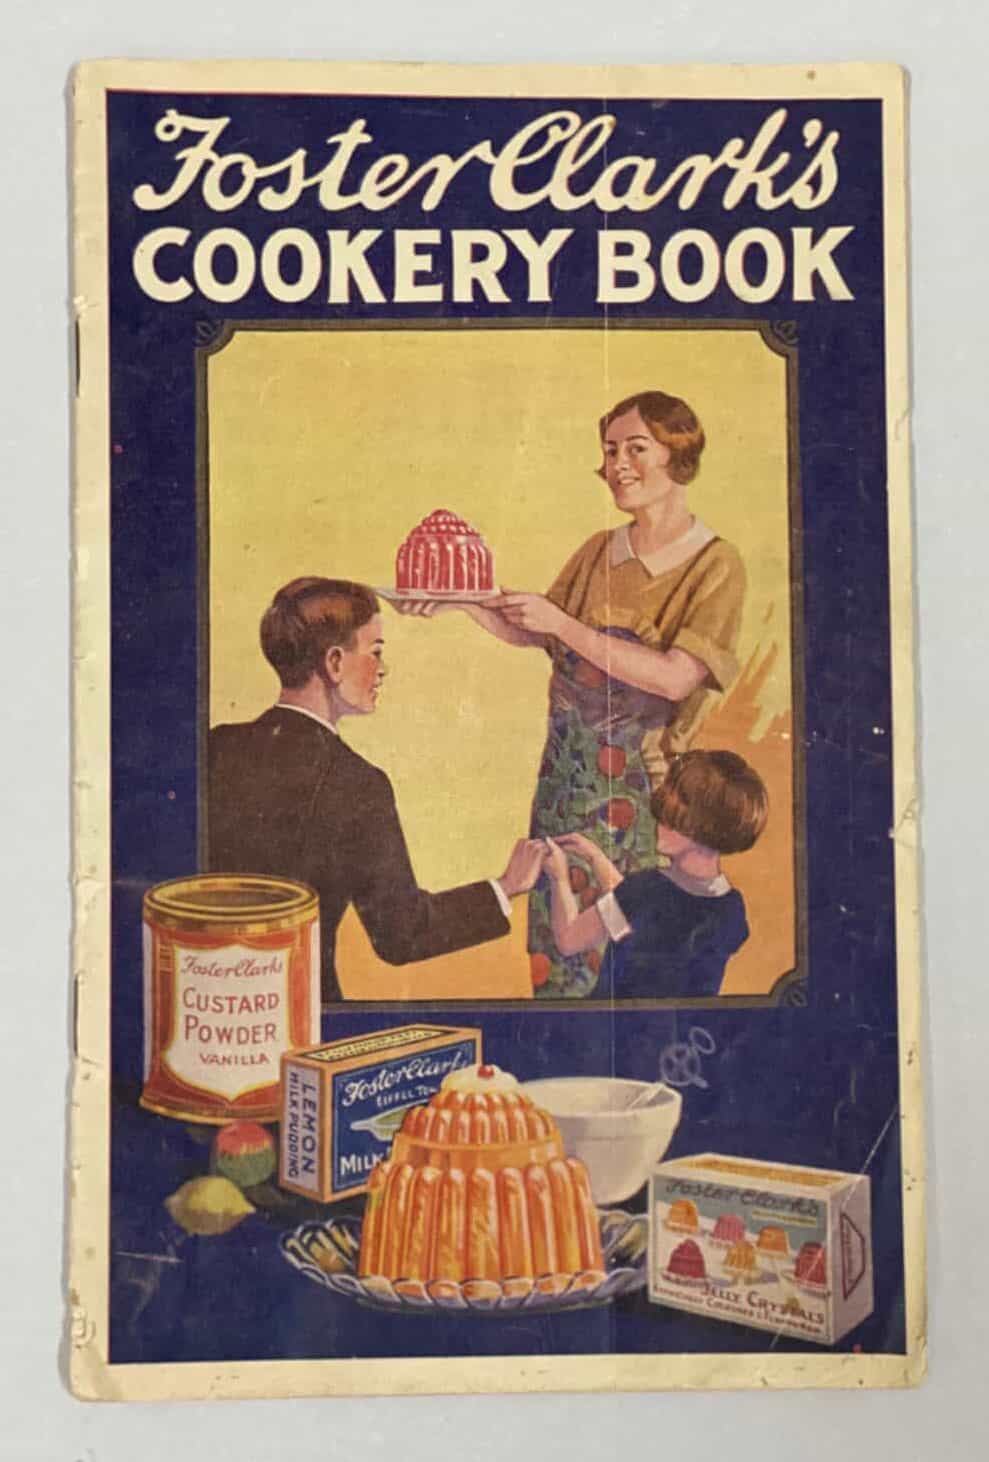 foster-clarks-cookery-book